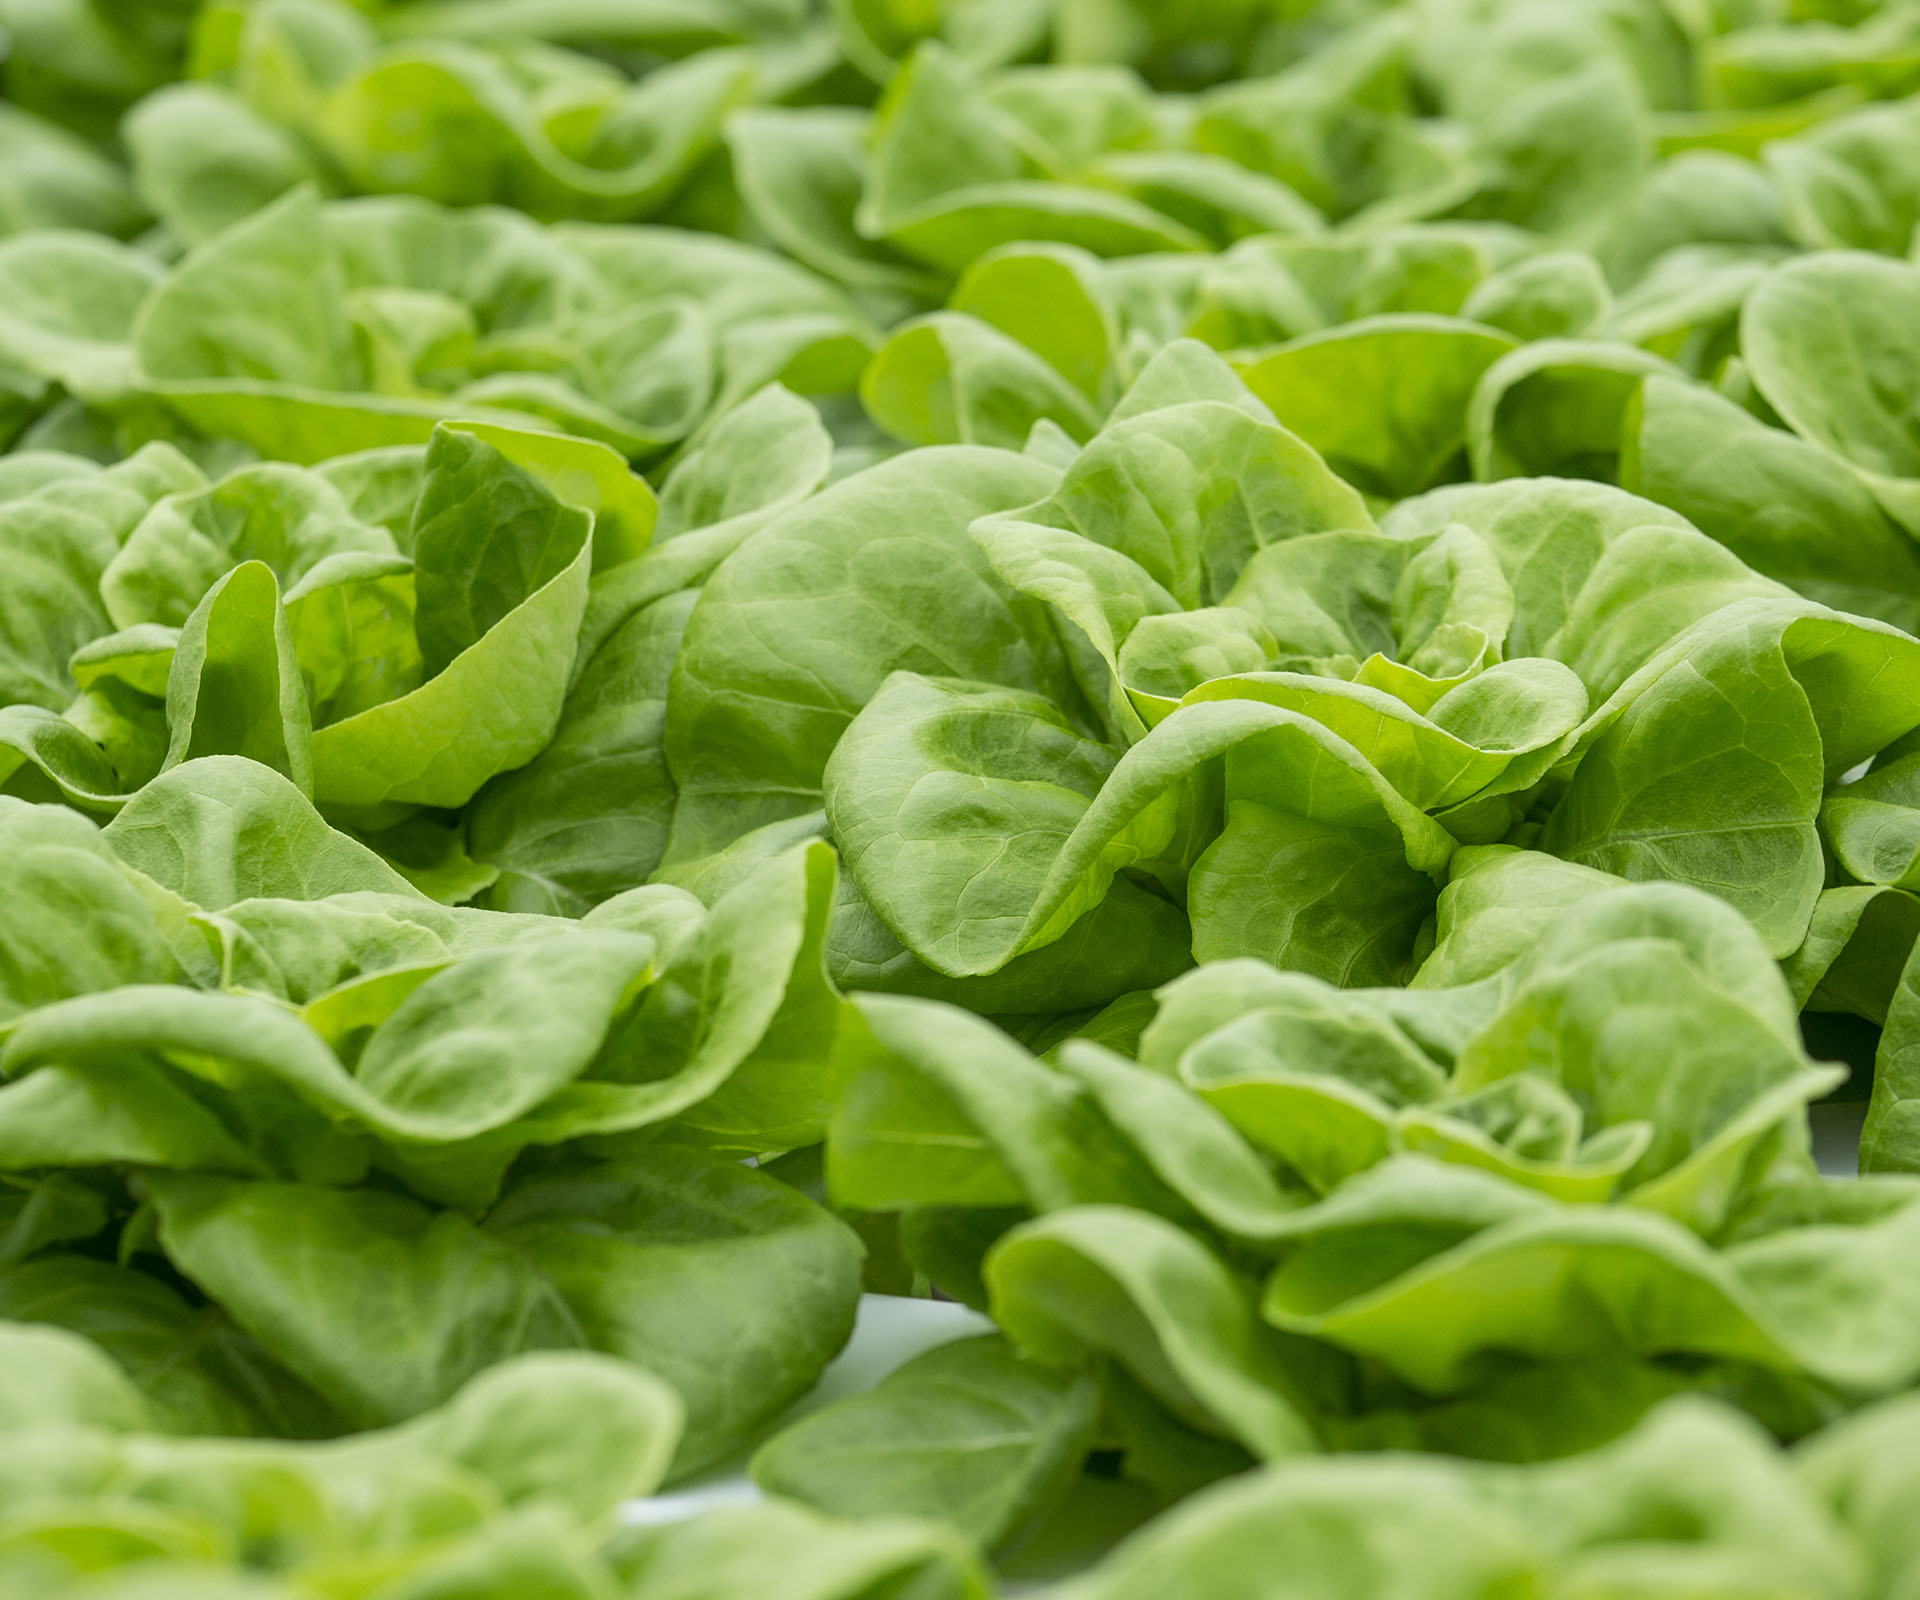 Lettuce recall: Salmonella outbreak linked to Coles and Woolies